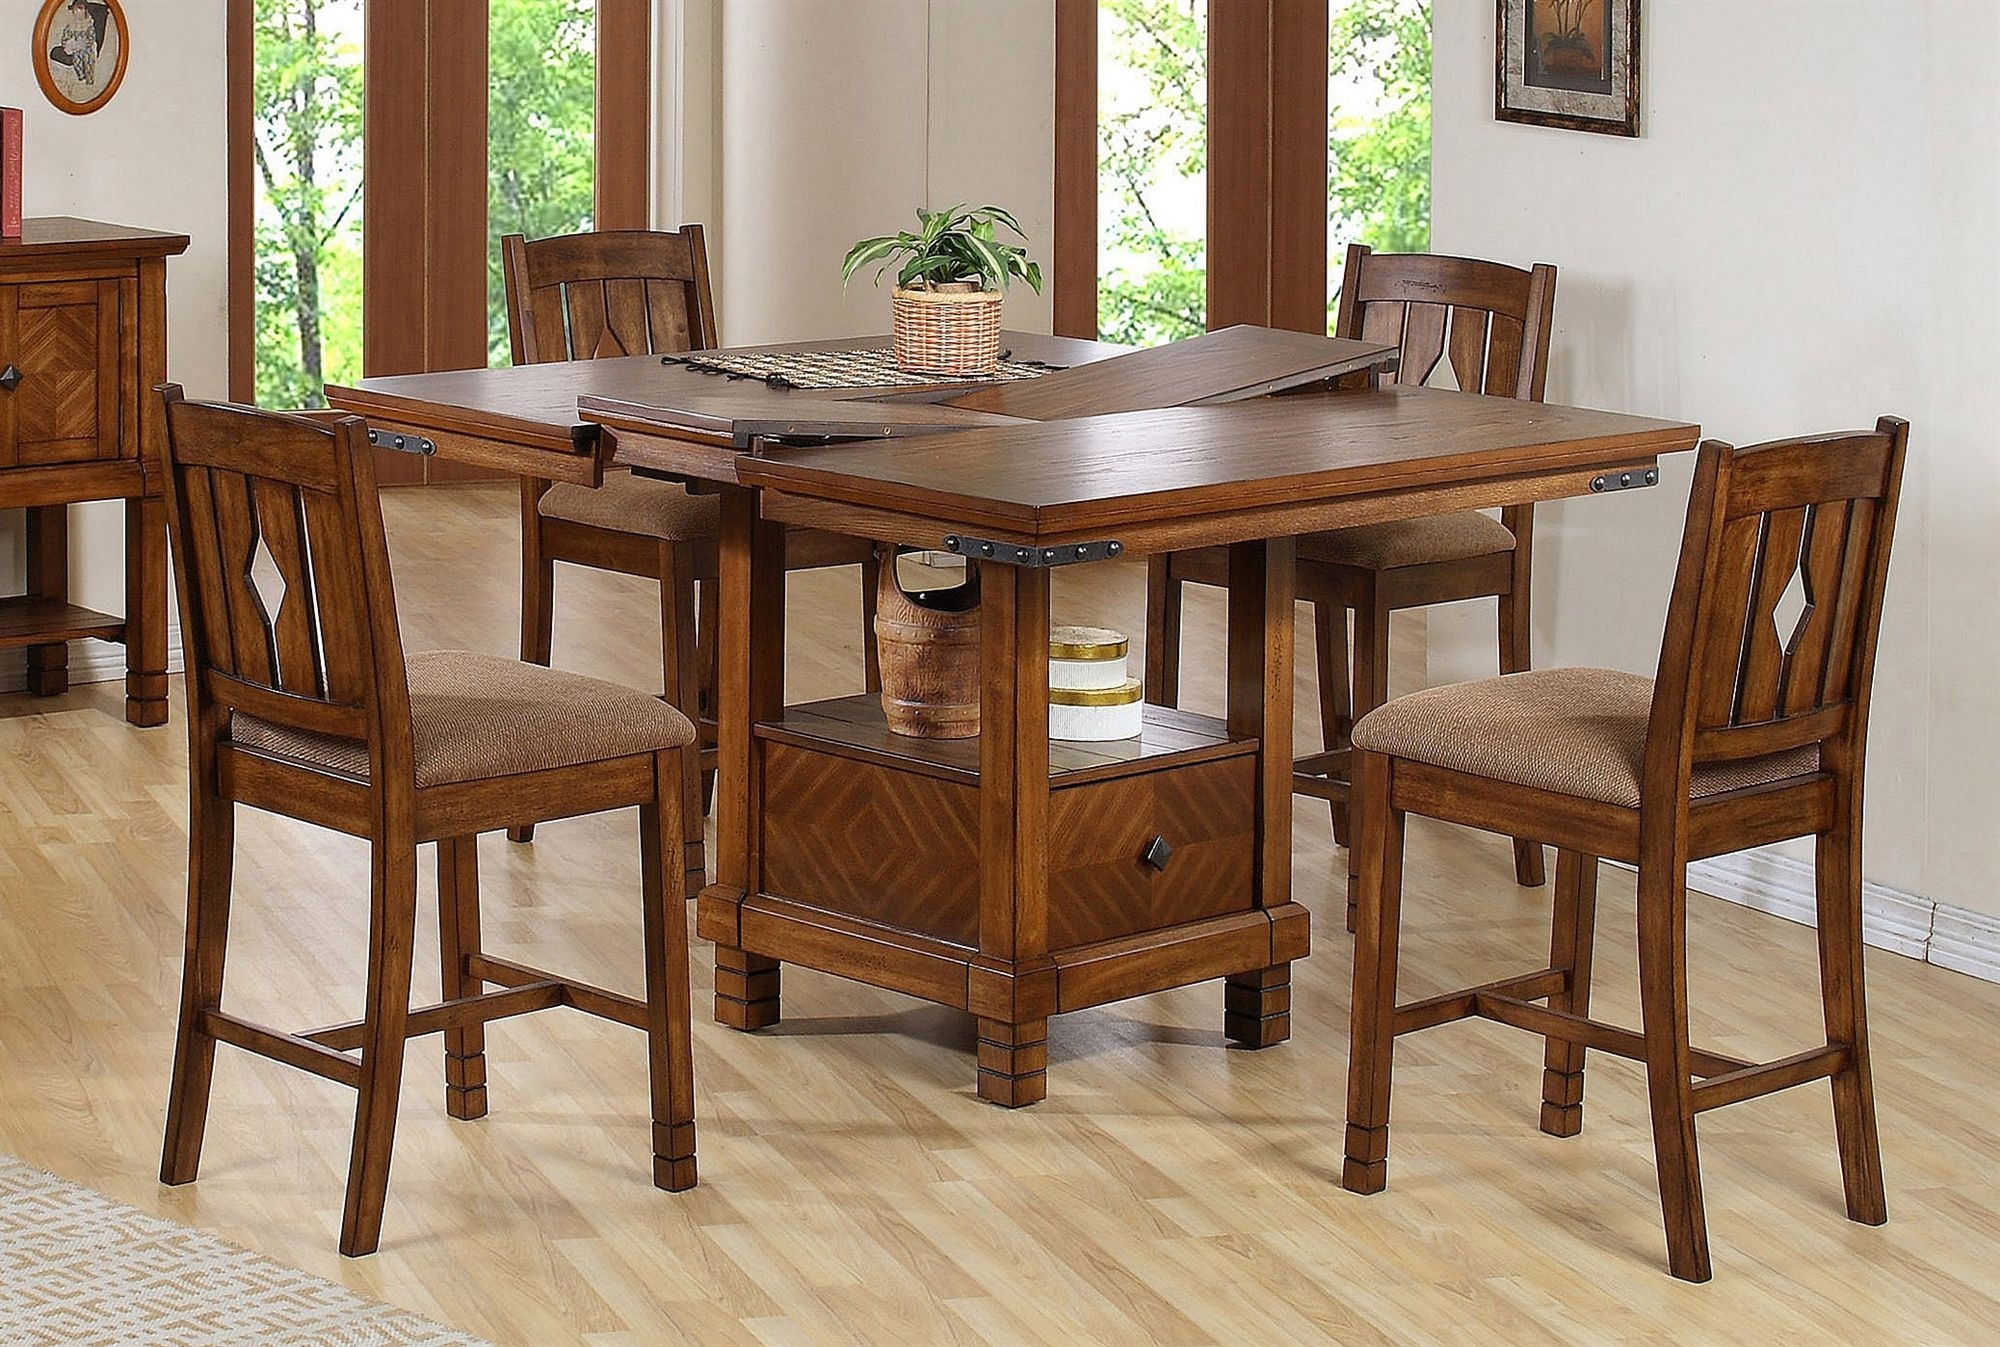 Butterfly Leaf Dining Table Ideas On Foter